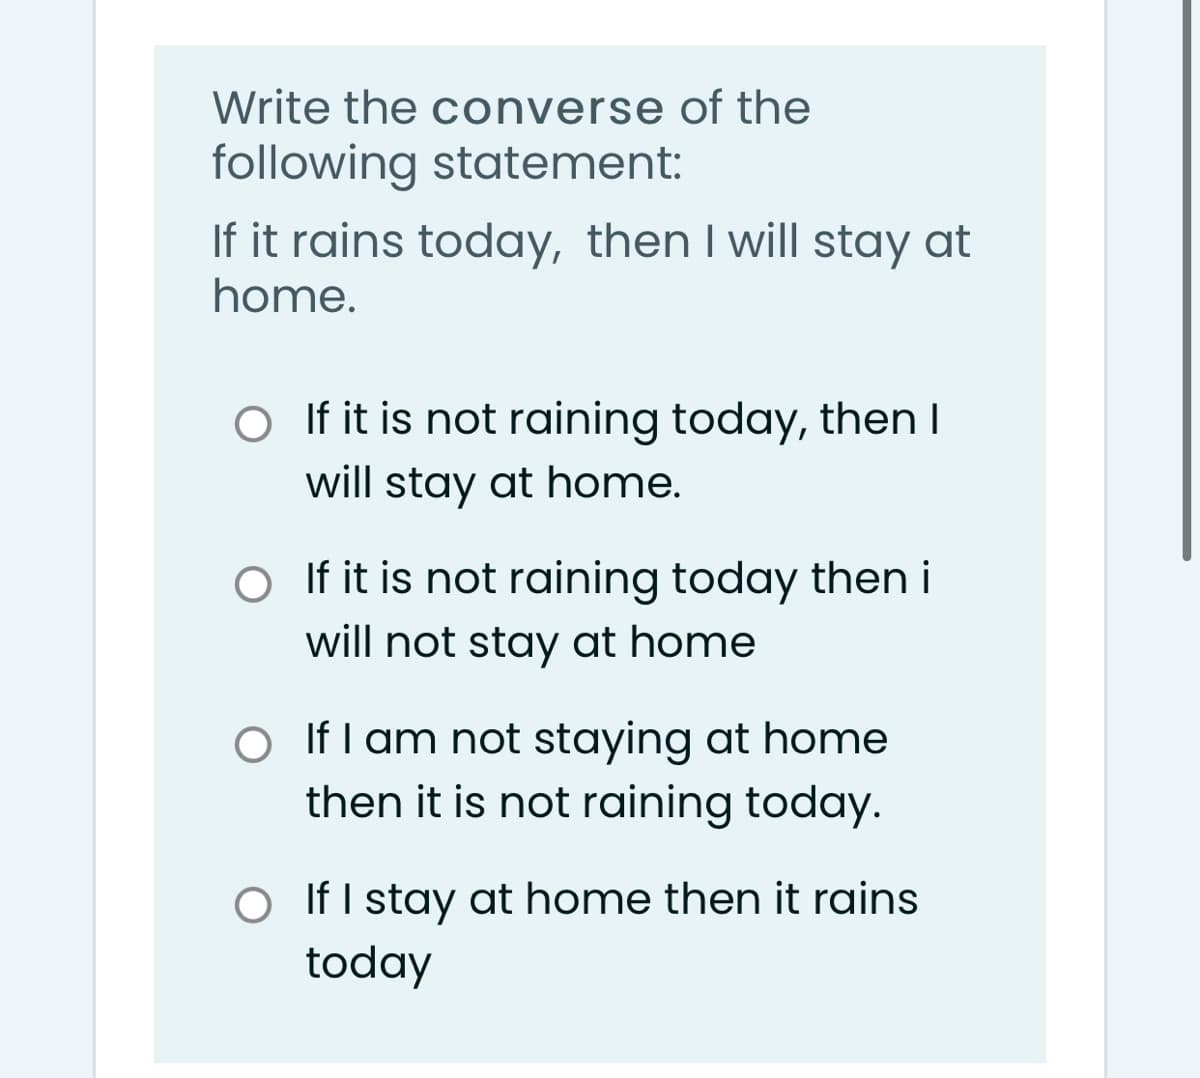 Write the converse of the
following statement:
If it rains today, then I will stay at
home.
O If it is not raining today, then I
will stay at home.
O If it is not raining today then i
will not stay at home
O If I am not staying at home
then it is not raining today.
O IfI stay at home then it rains
today
